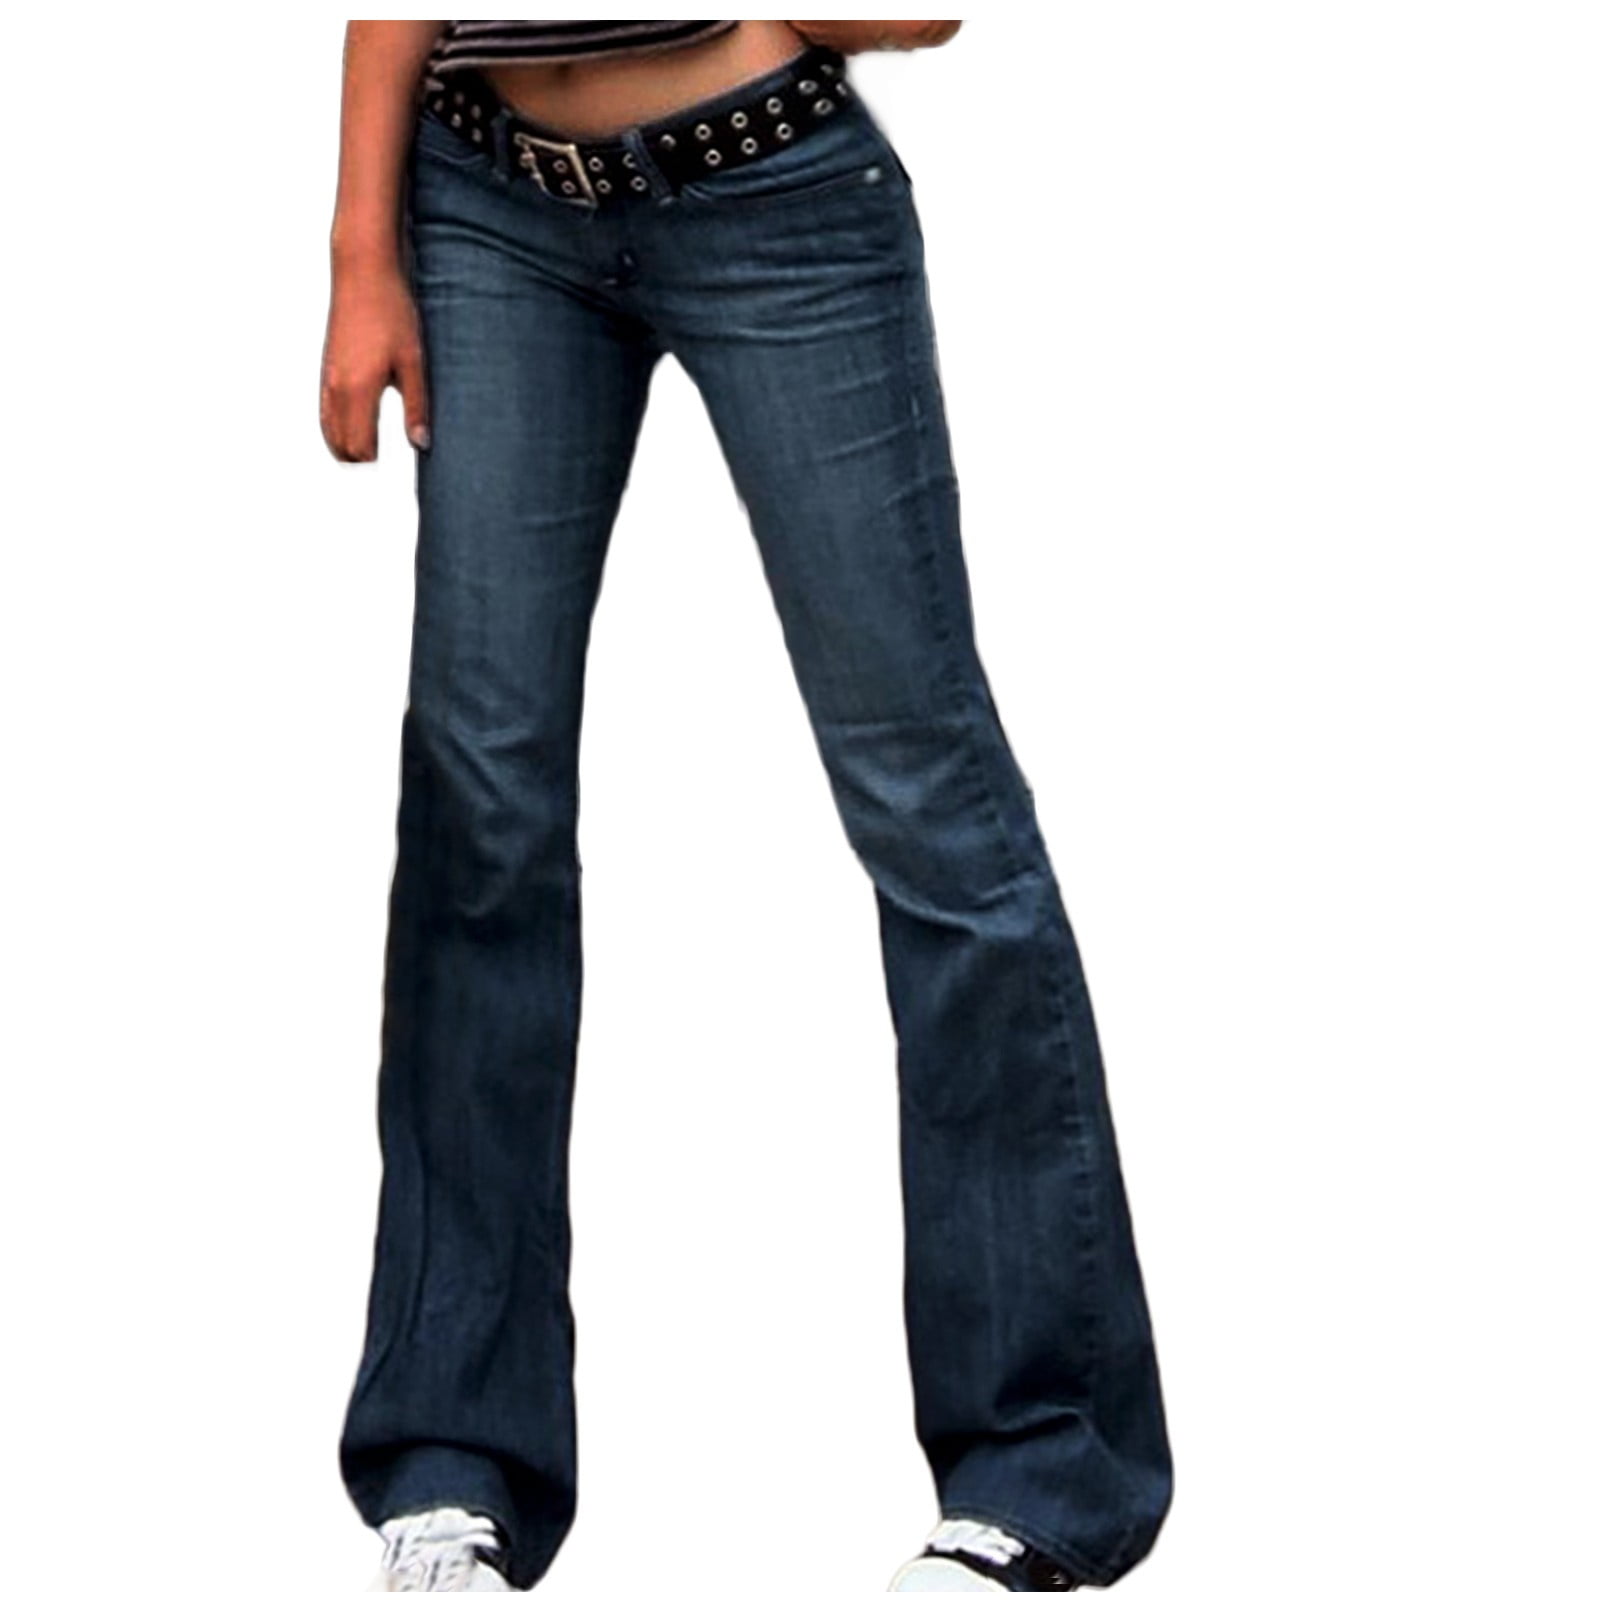 Pants for Women Sexy Solid Color Thin Boot Cuts Wide Leg Jeans With Pockets  Casual Breathable Going Out Denim Pants (Large, Blue)